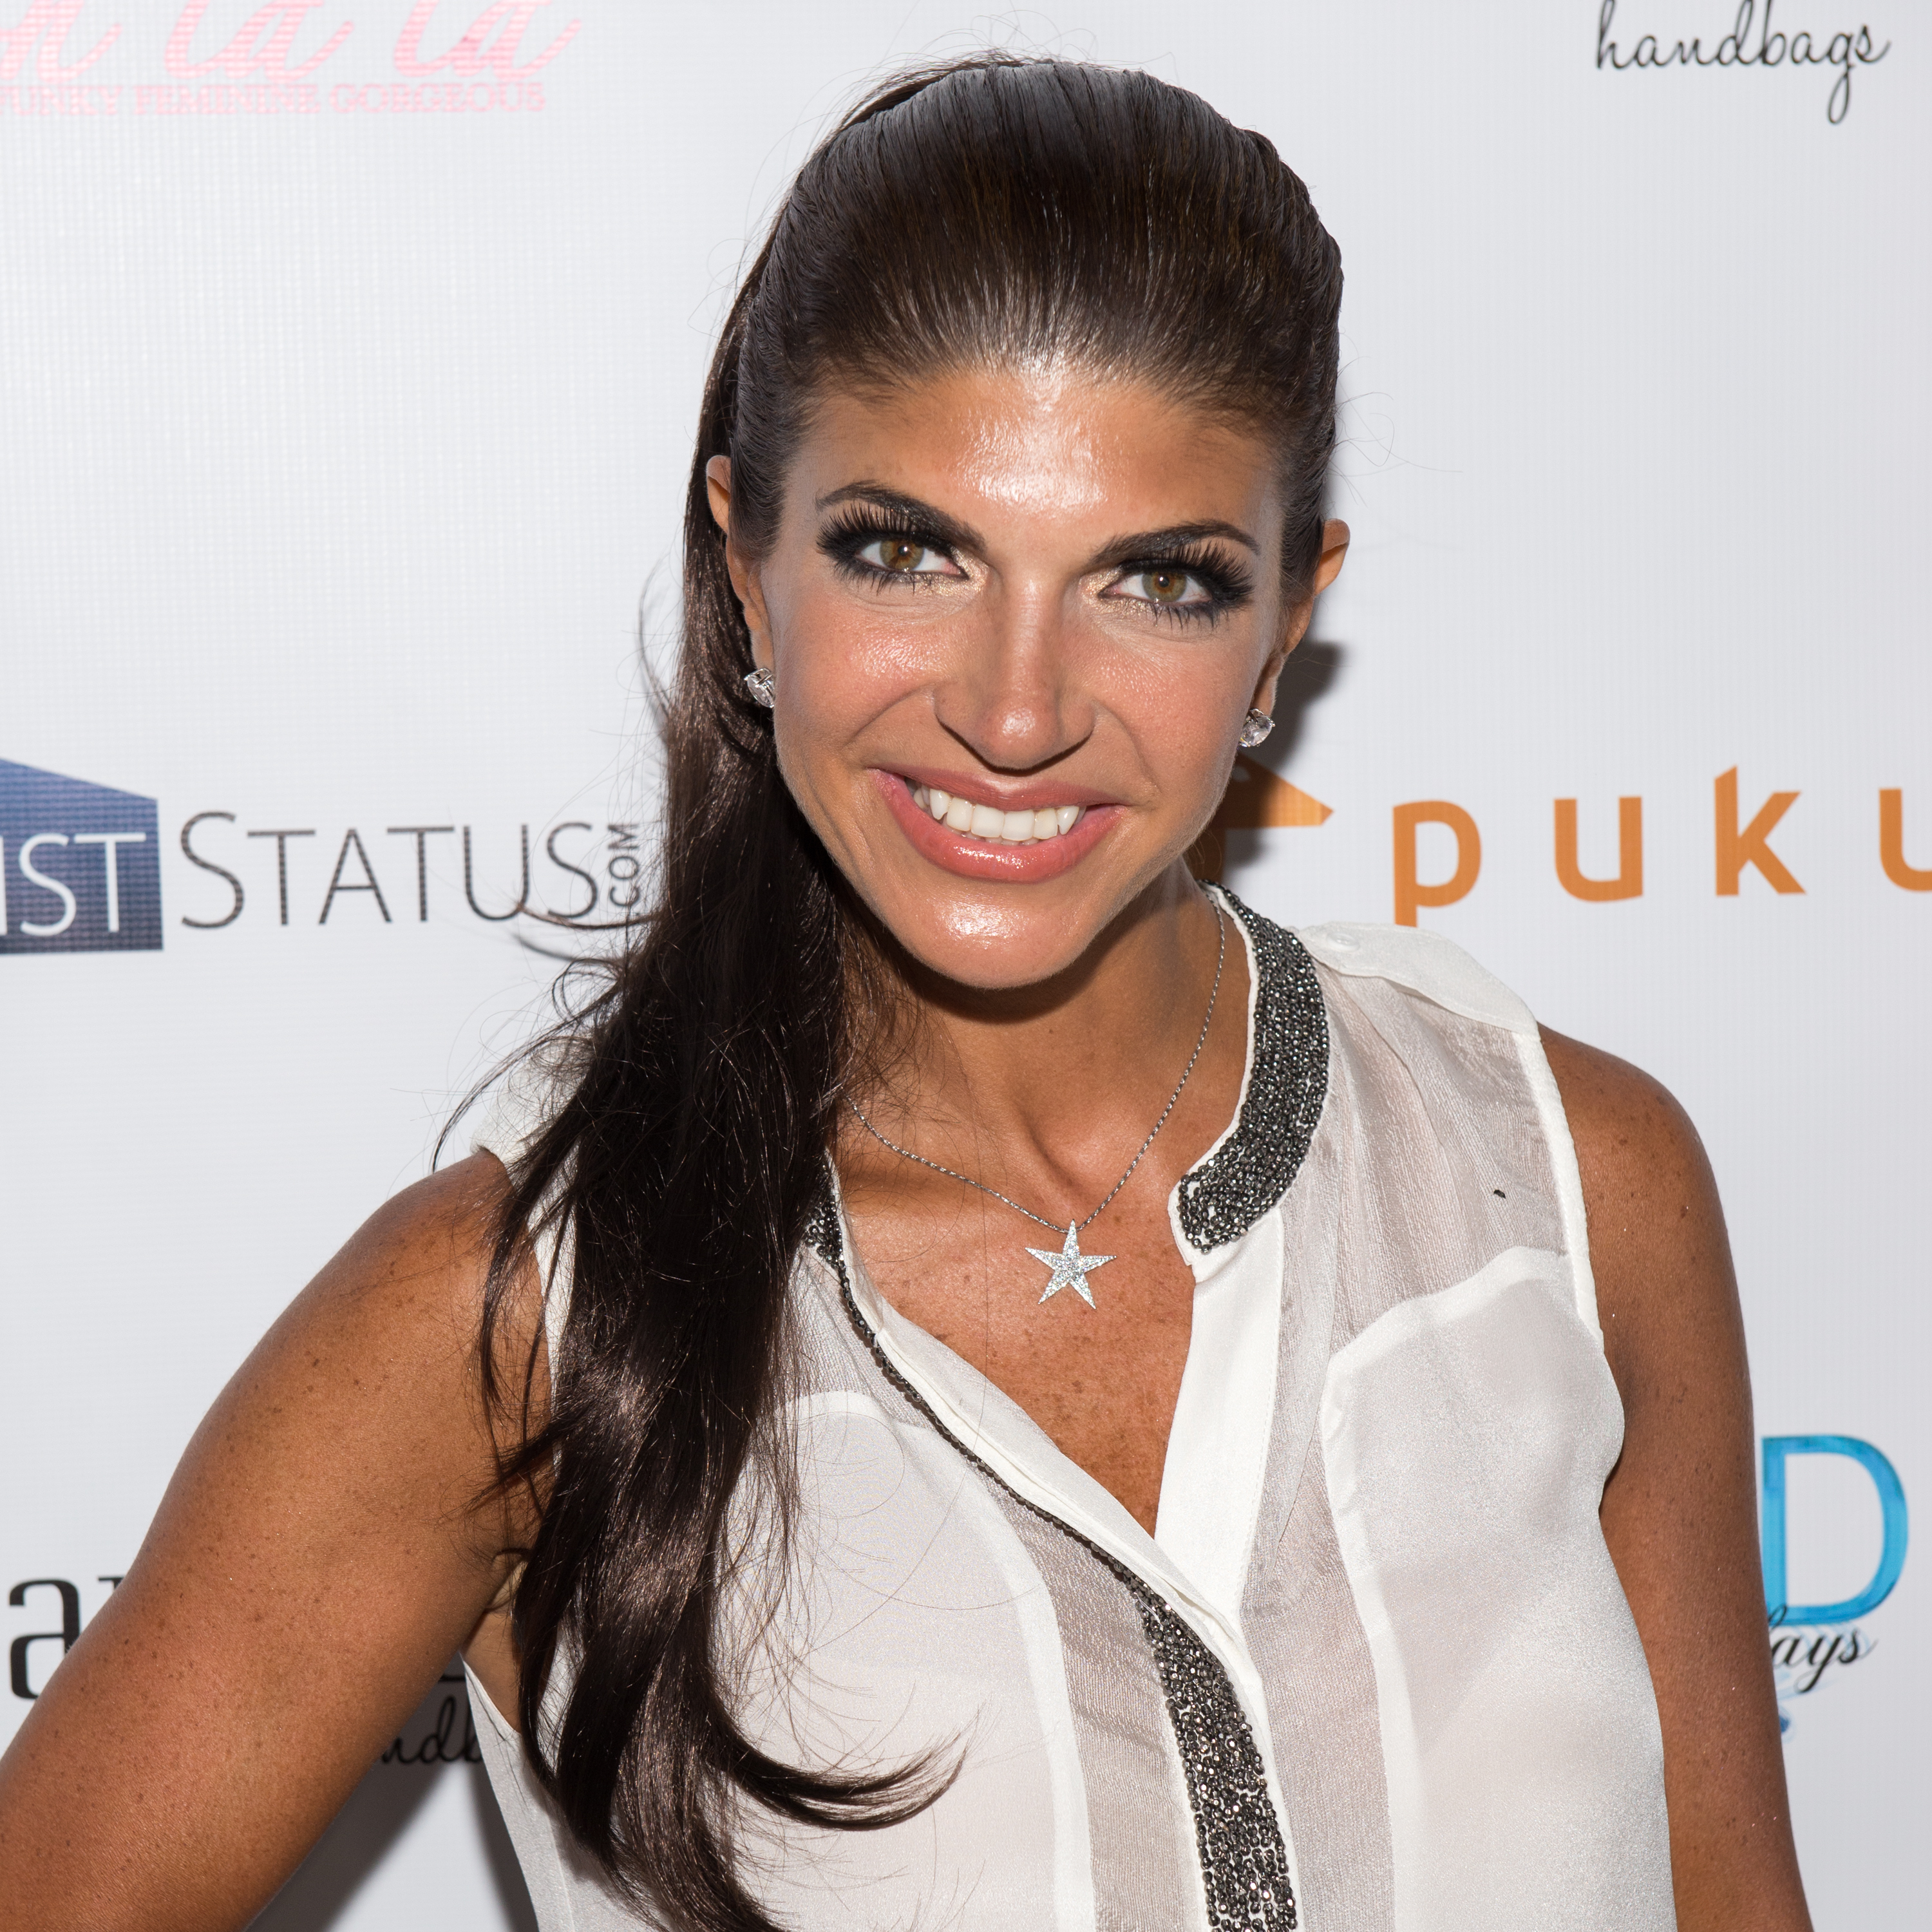 Tevevision Personality Teresa Giudice attends the White Party hosted by Dina Manzo and Teresa Giudice at Woodbury Country Club on July 21, 2014 in Woodbury, New York. (Mike Pont&amp;mdash;Getty Images)